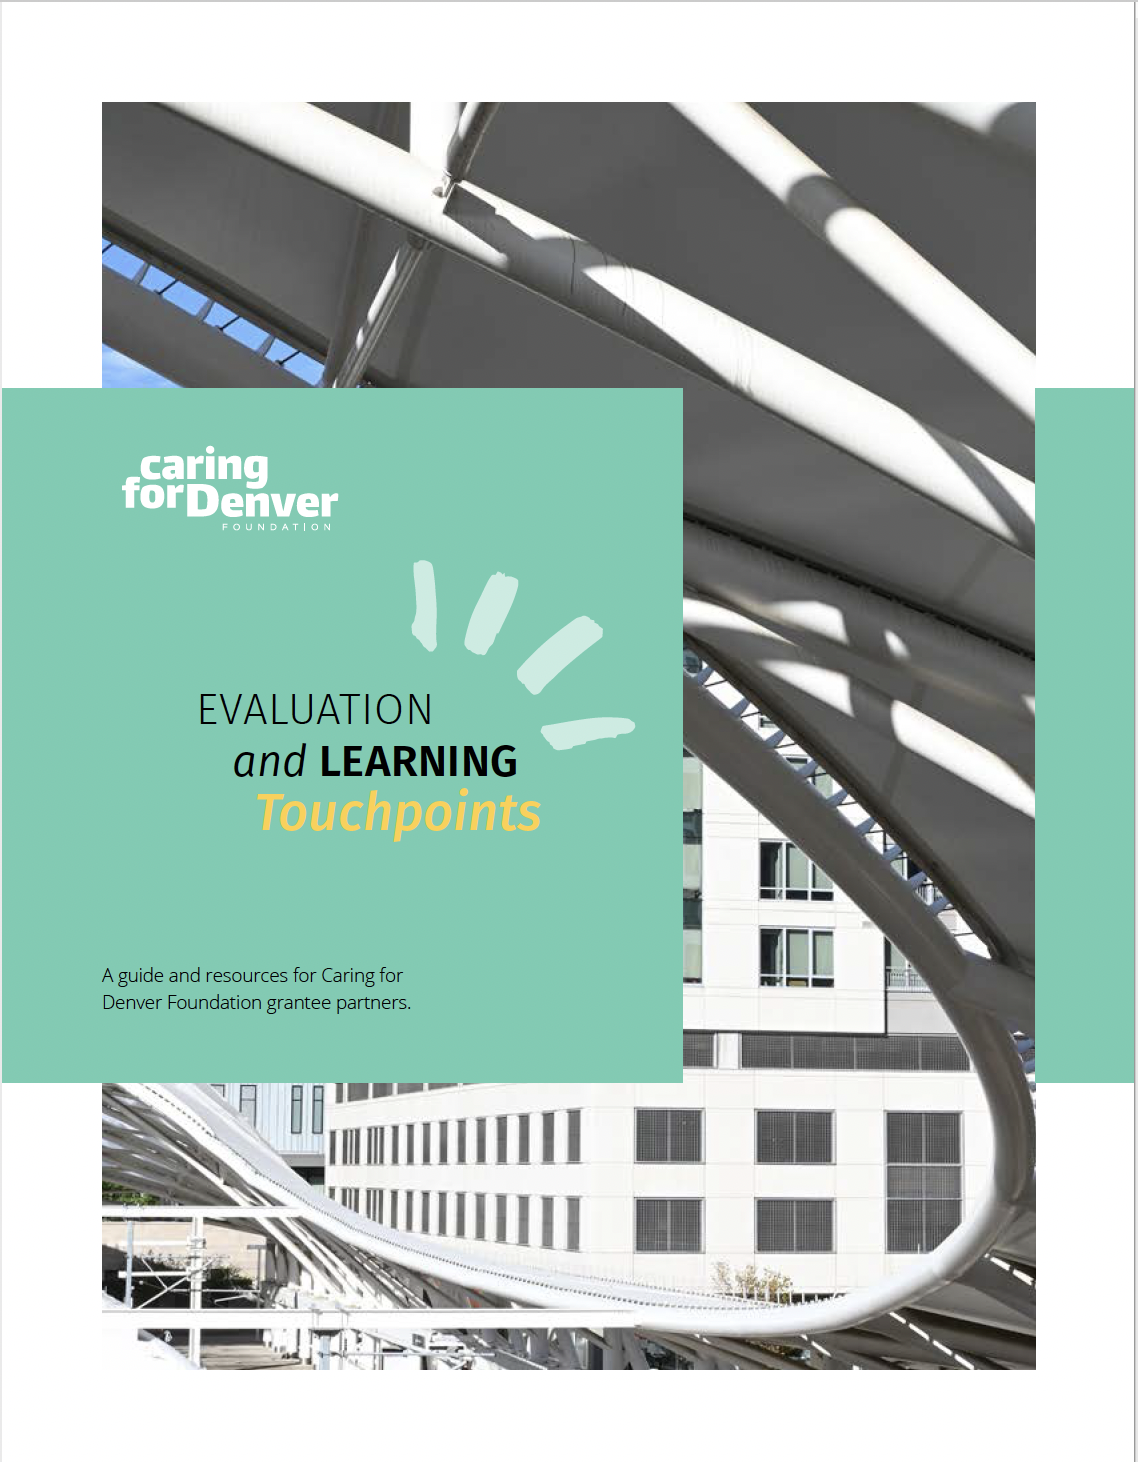 Thumbnail of Caring for Denver's Evaluation Touchpoints guide.